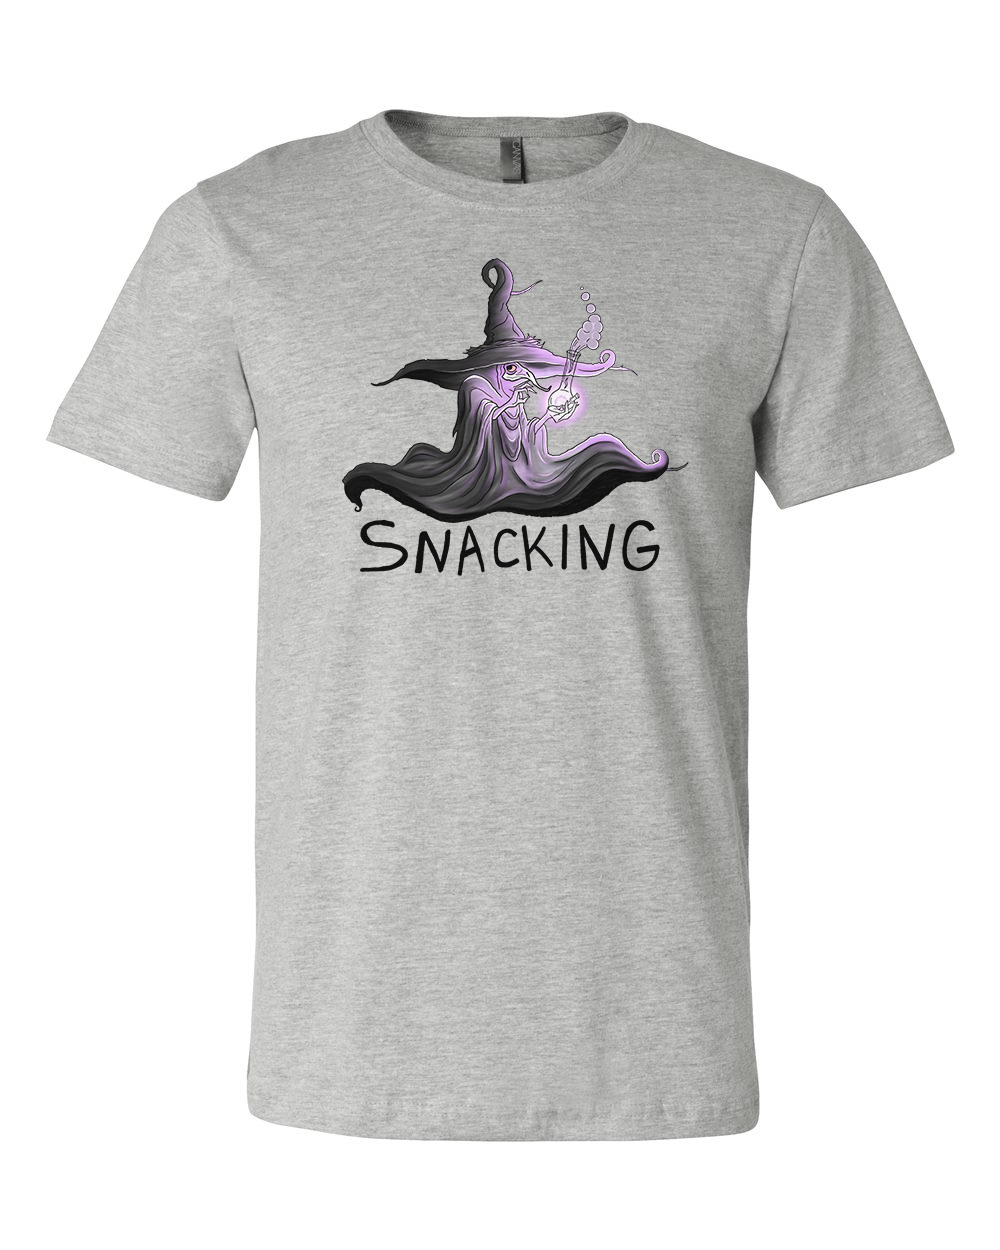 Snacking : Bongwich Tee